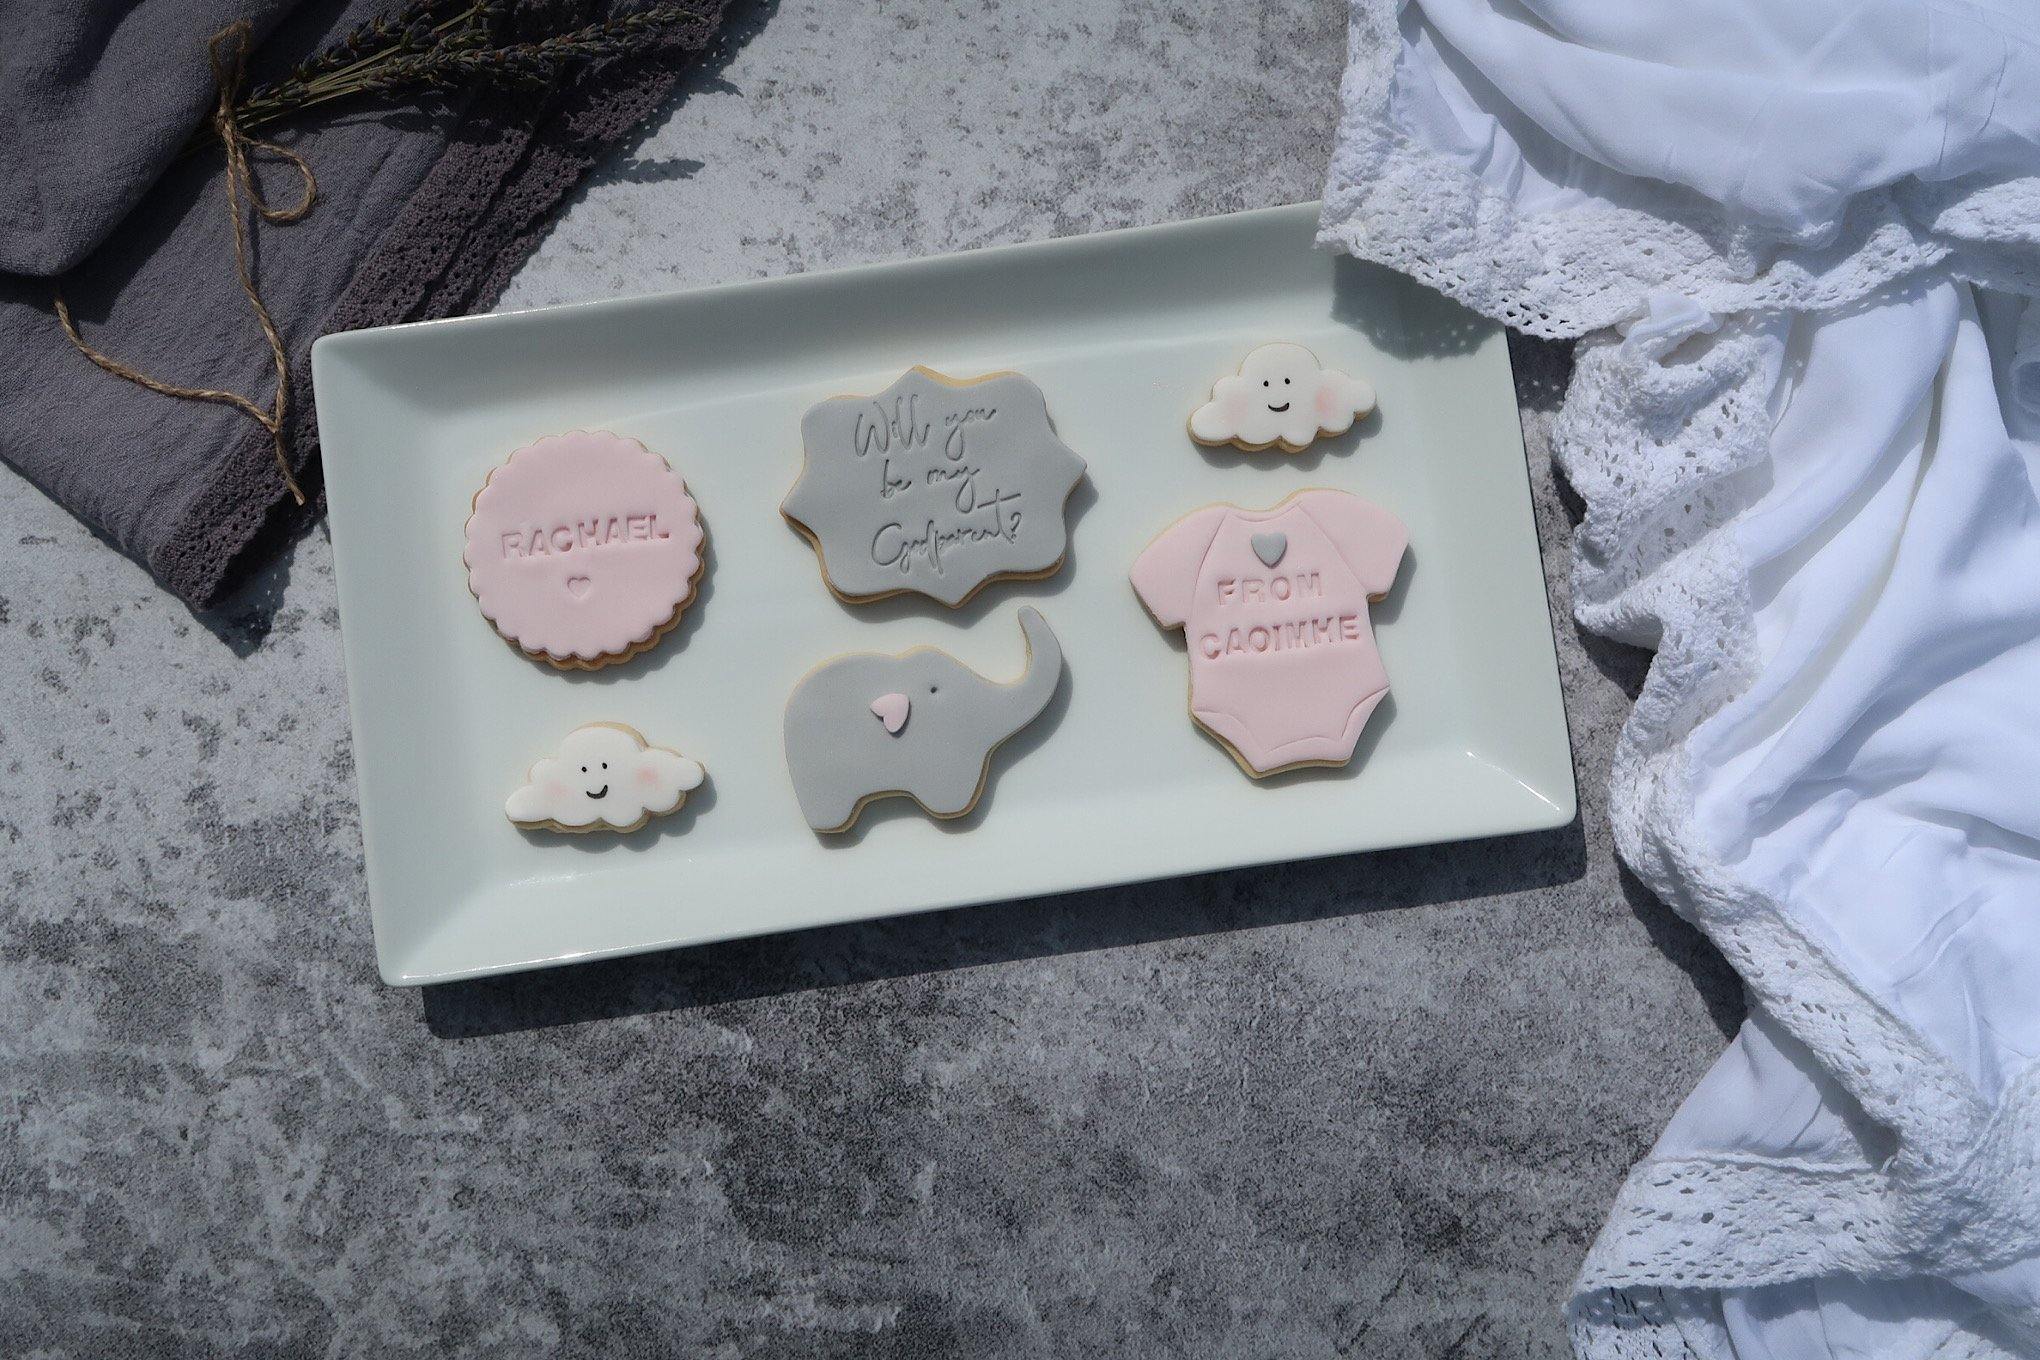 Godparent Proposal - Baby Girl - Gemma’s Cookie Co